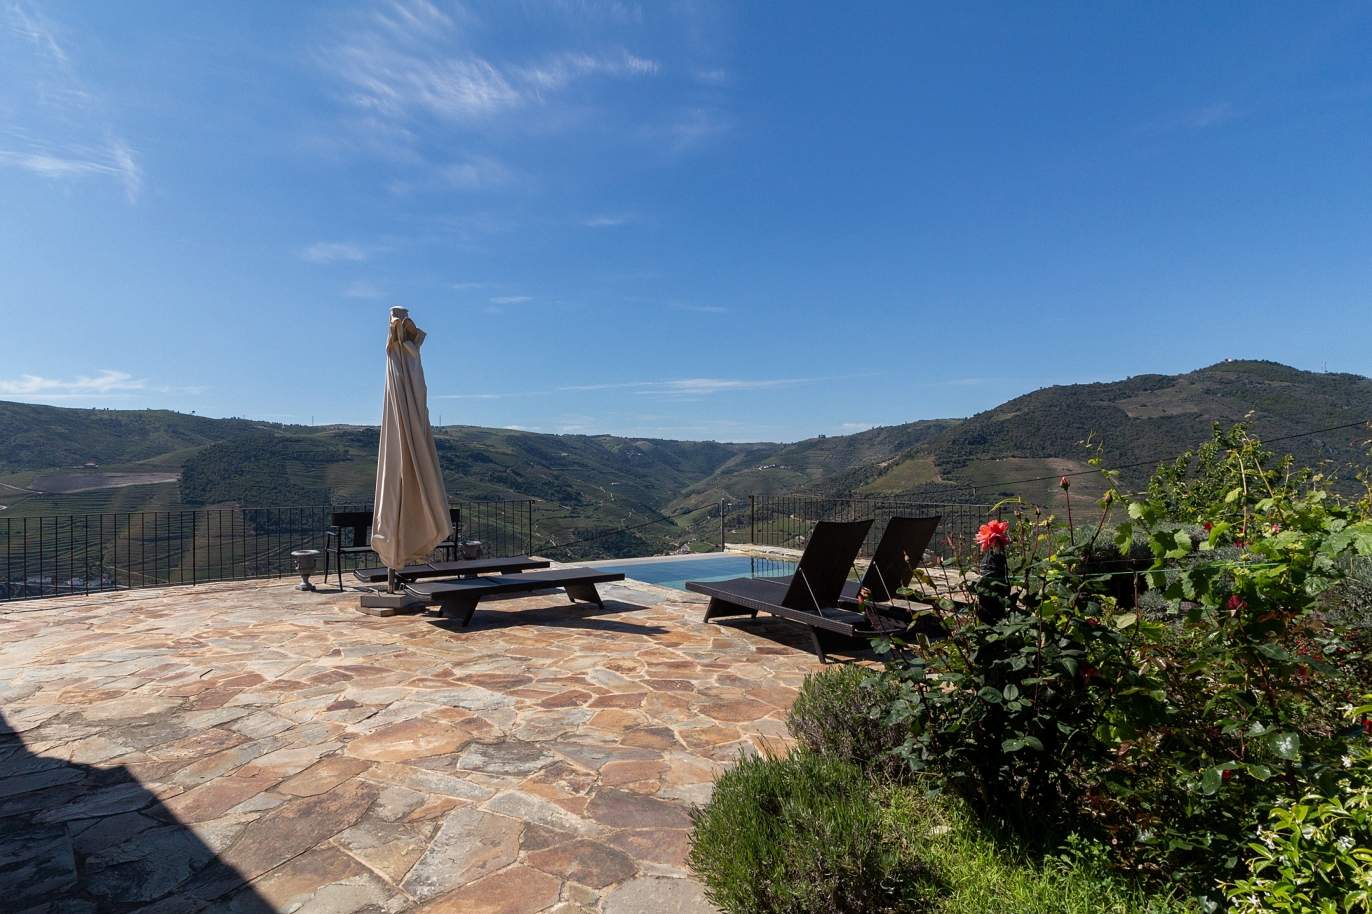 Sale country house in vineyard w/ river views, Douro Valley, Portugal_171508